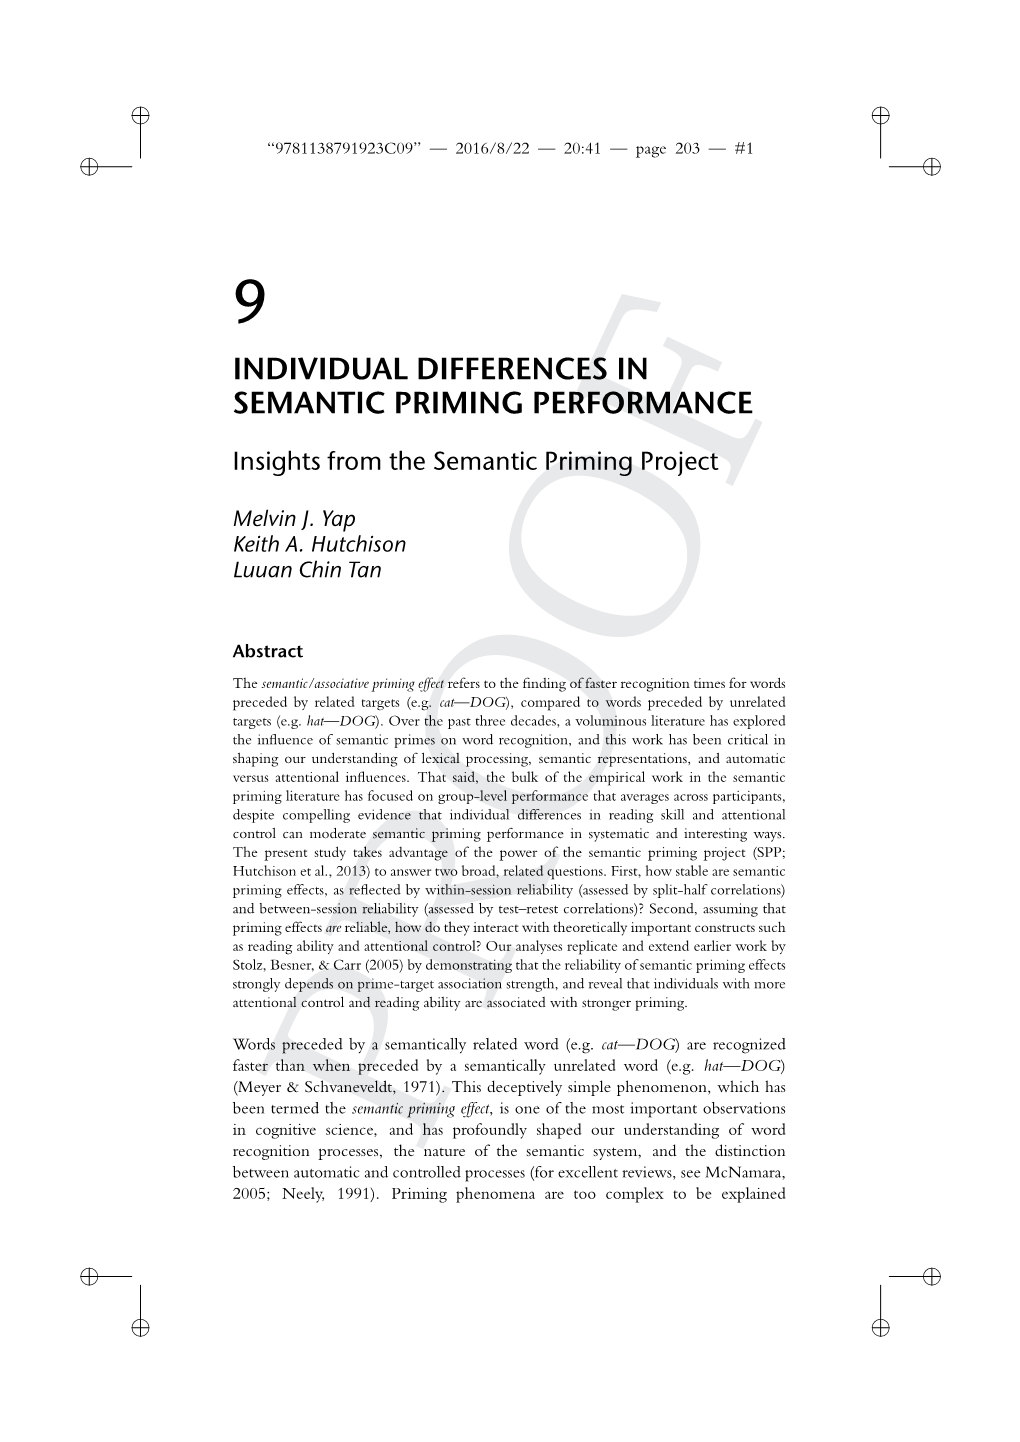 Individual Differences in Semantic Priming Performance